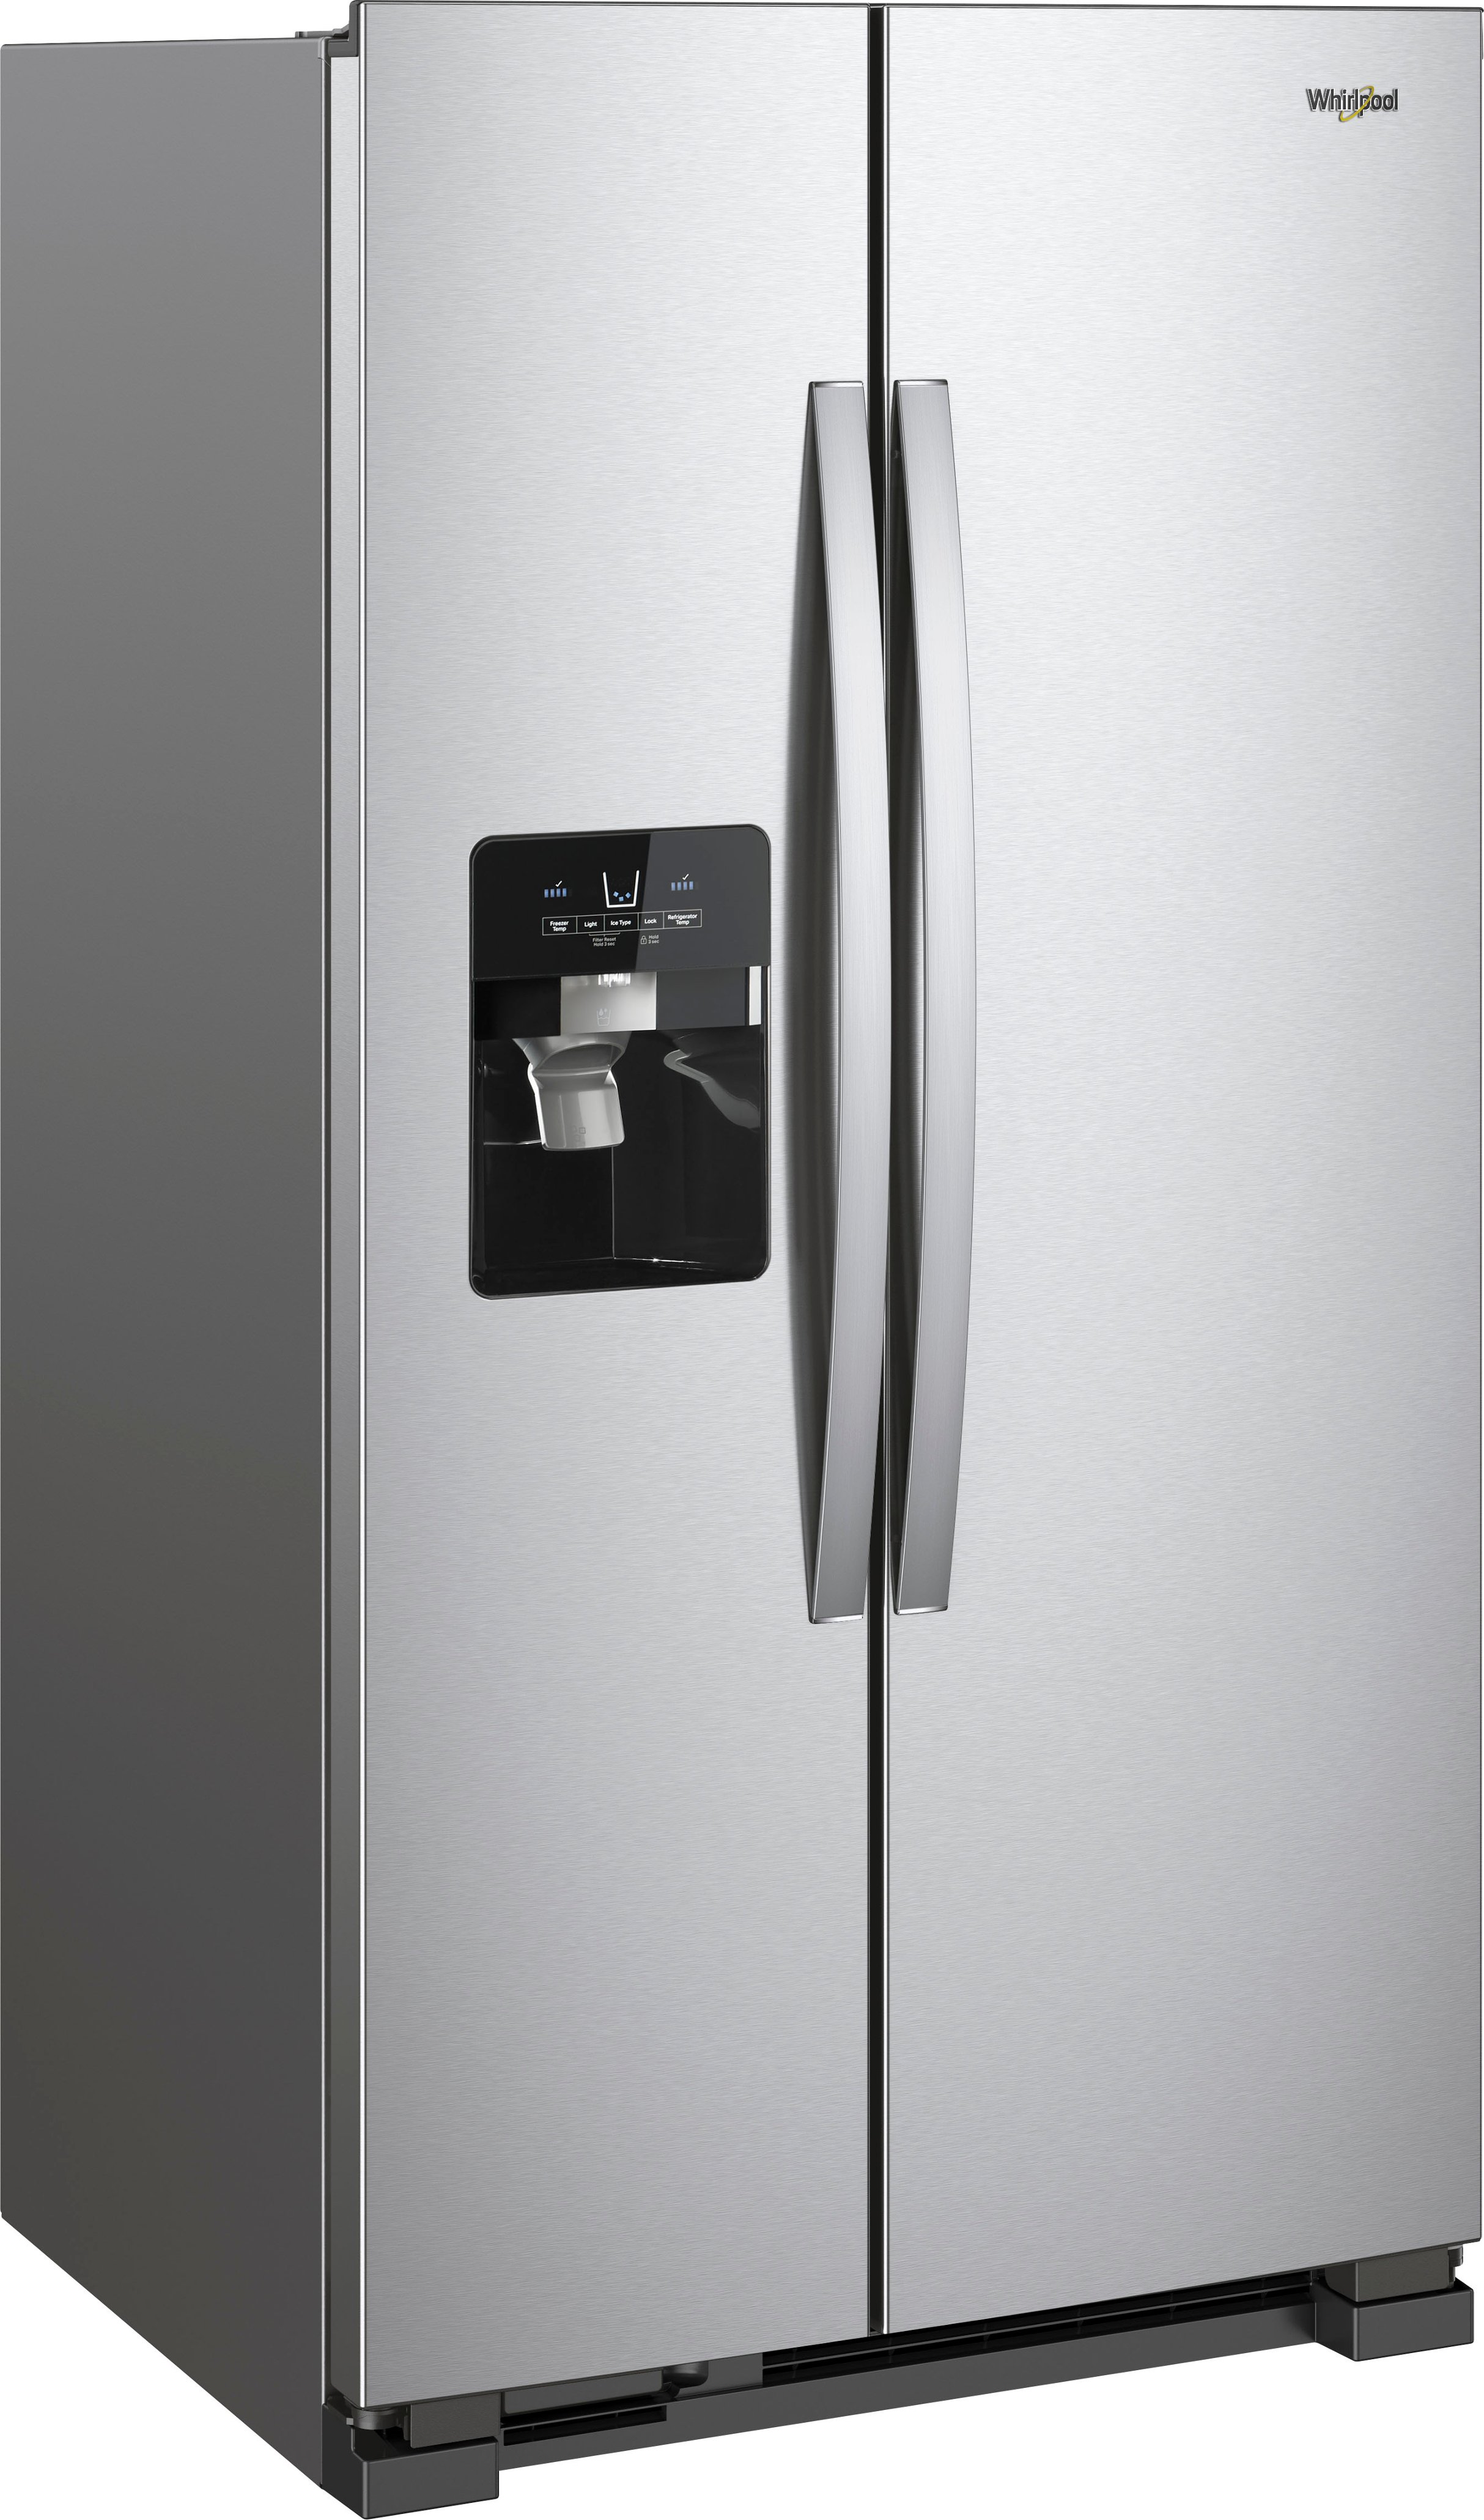 Angle View: Whirlpool - 28.5 Cu. Ft. Side-by-Side Refrigerator - Sunset bronze